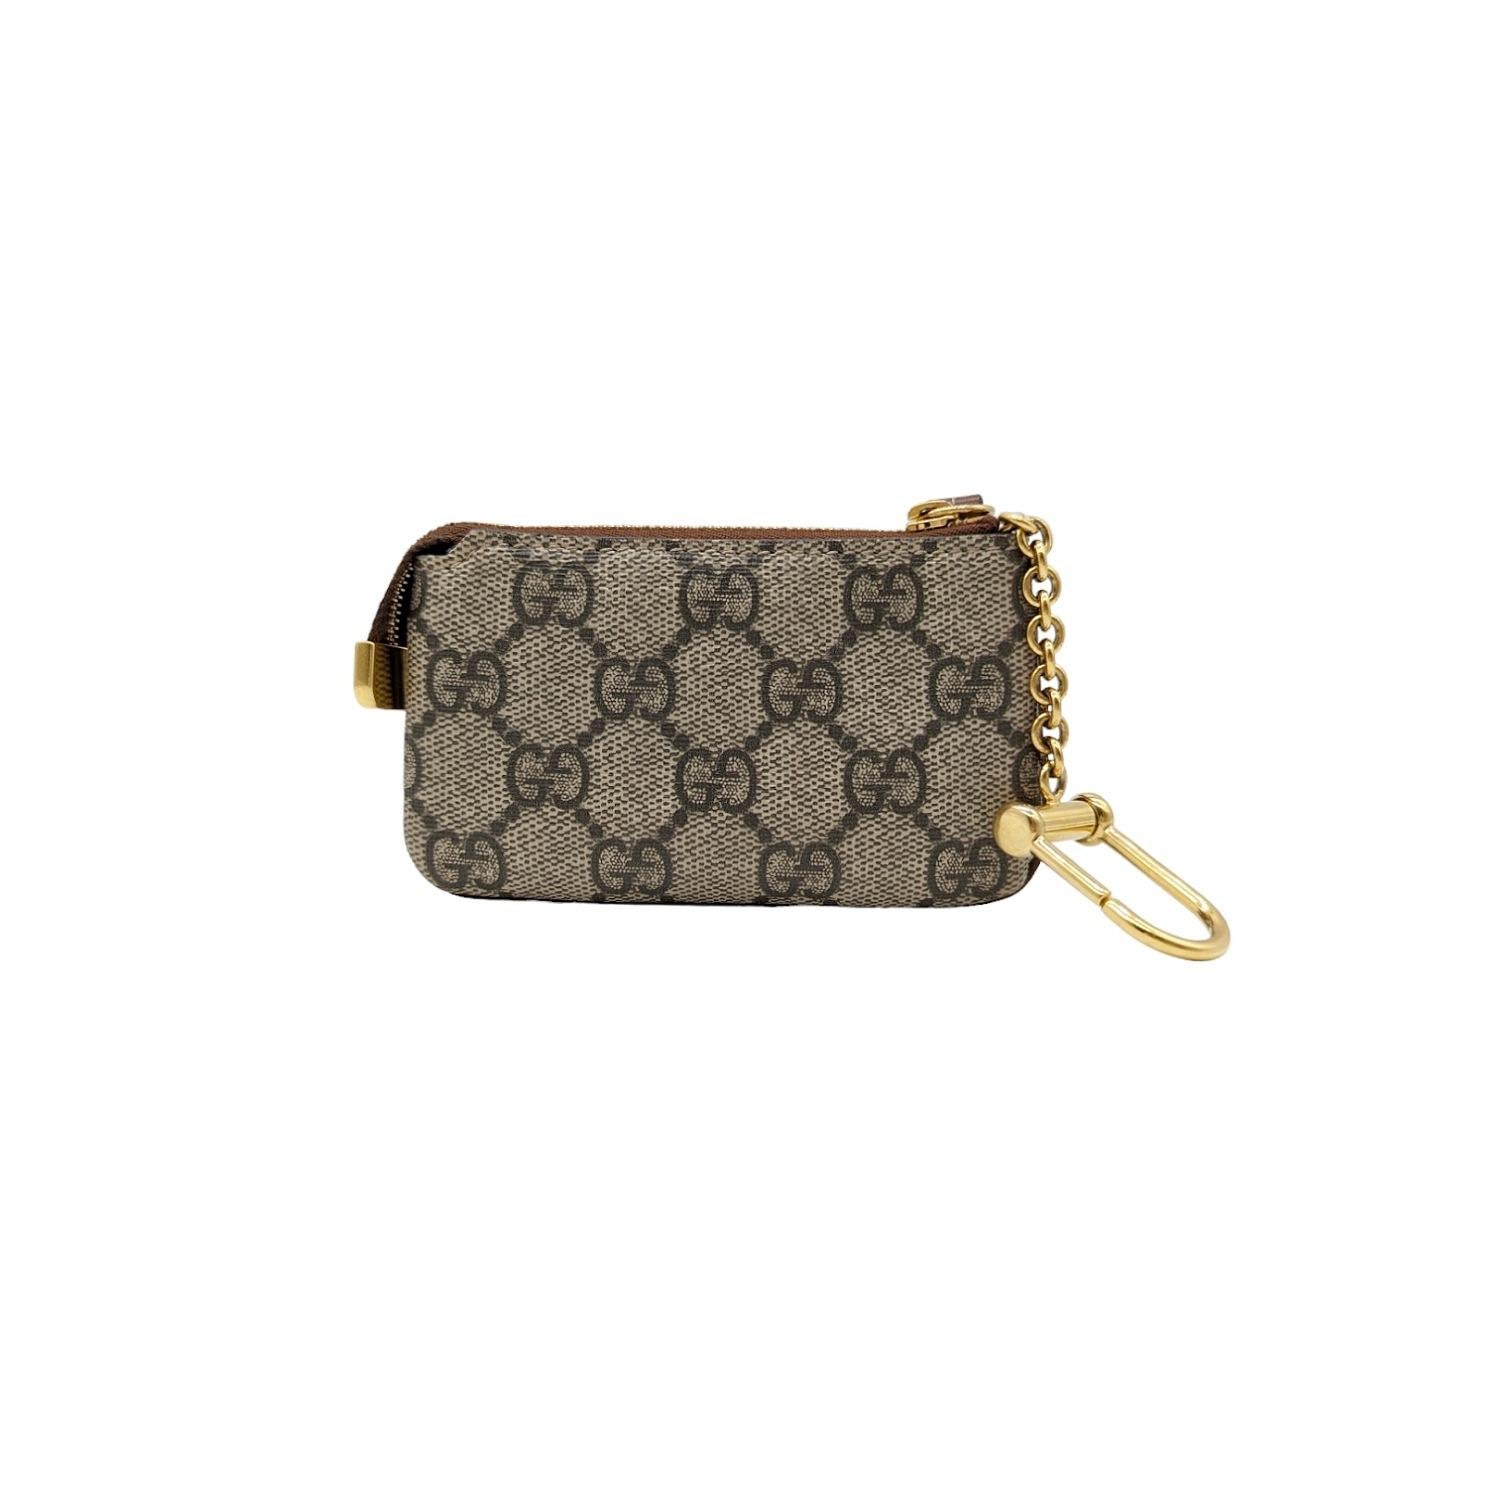 Gucci GG Supreme Monogram Ophidia Key Case Brown In Excellent Condition For Sale In Scottsdale, AZ